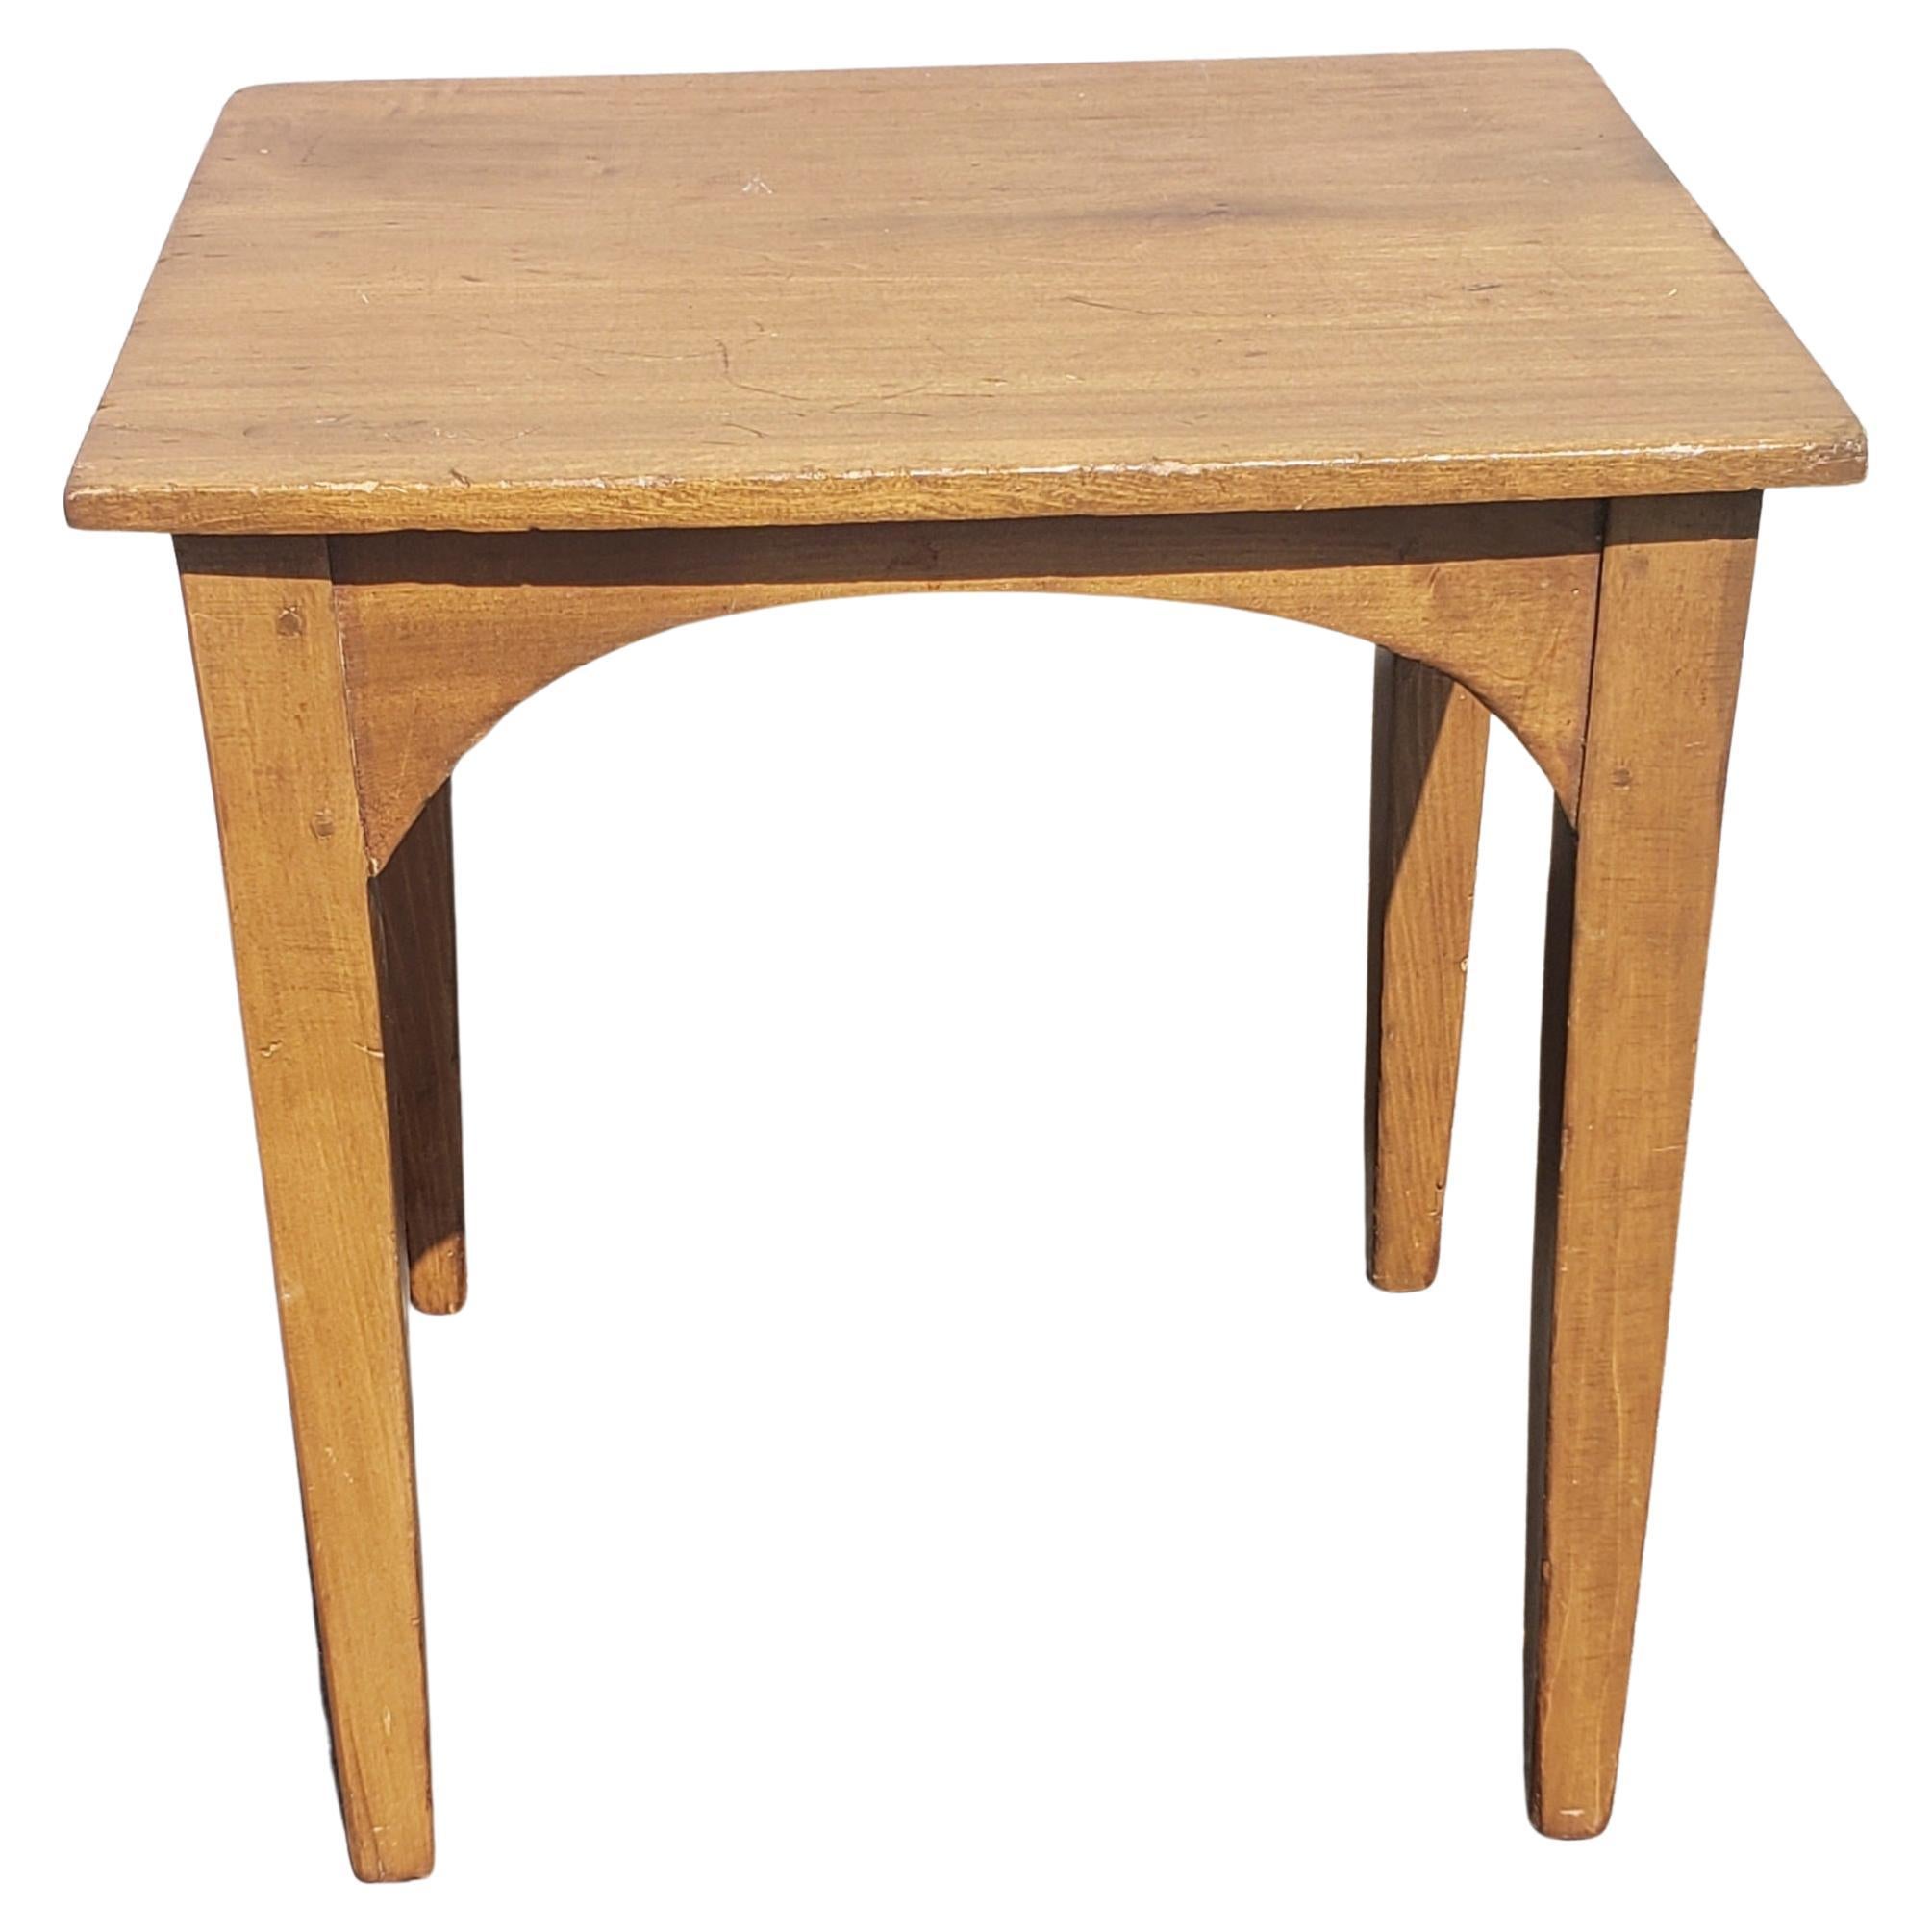 Early American Style Maple Side Table For Sale